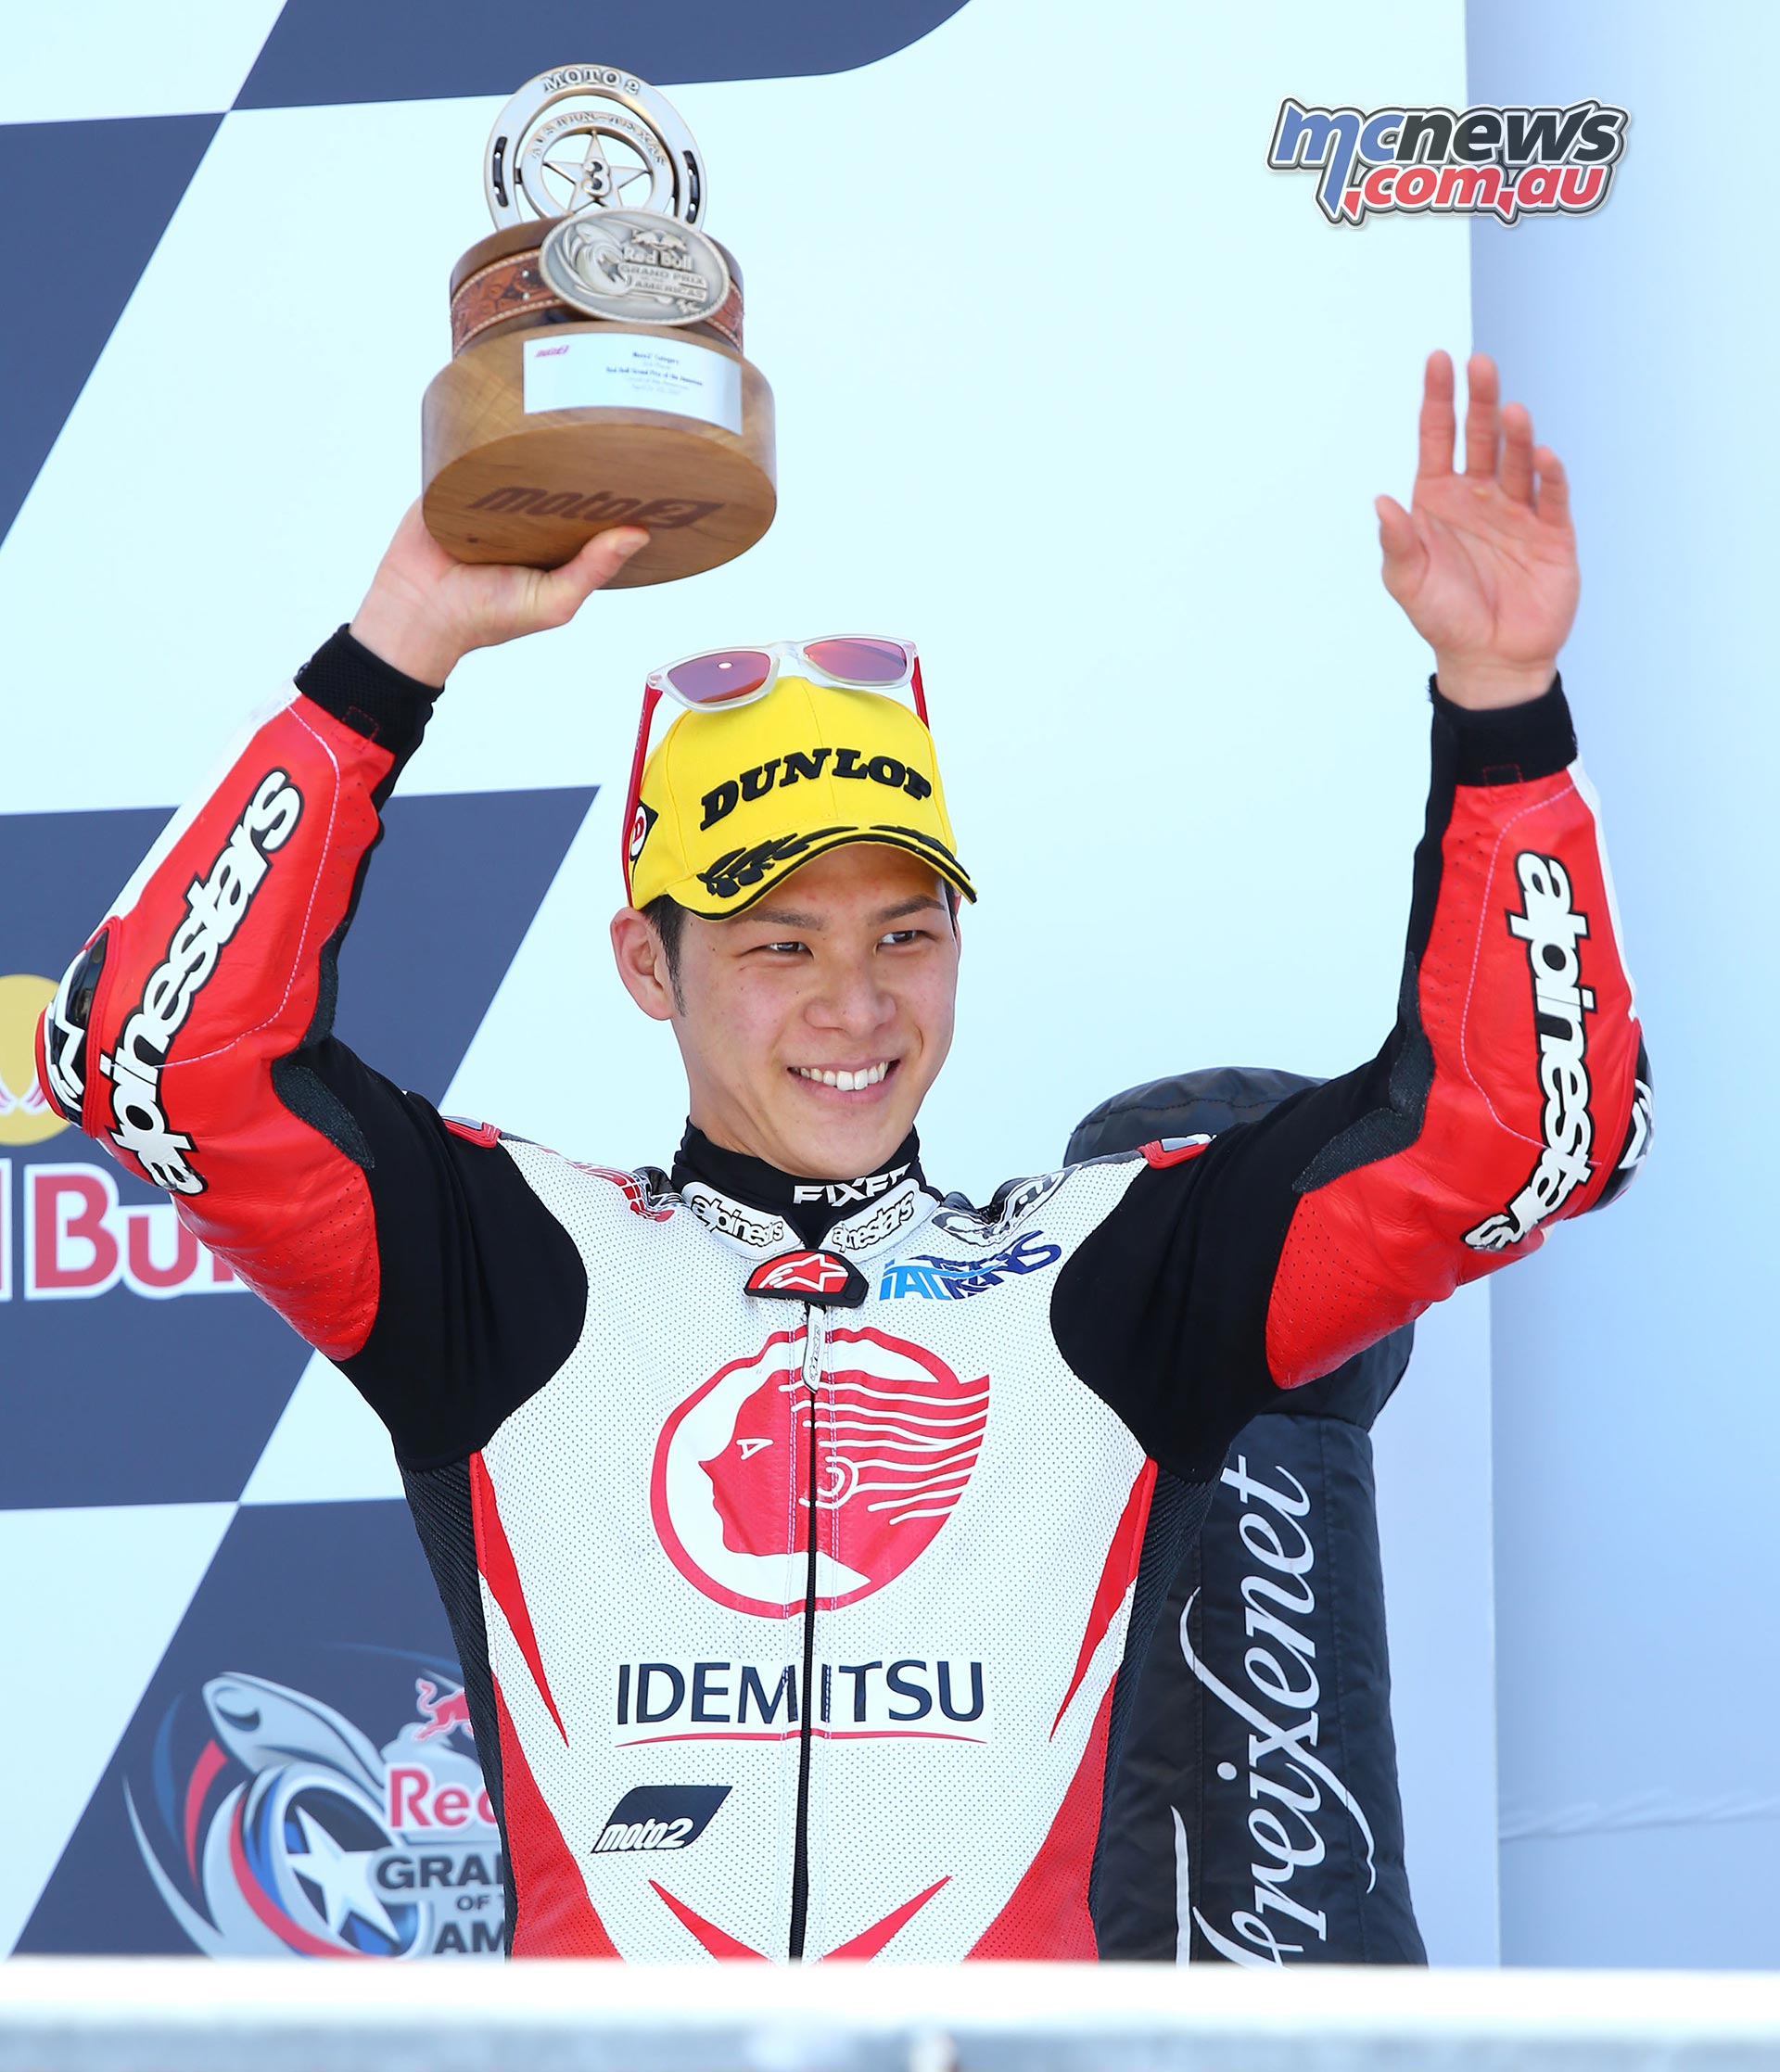 LCR Honda expand with Takaaki Nakagami for 2018 | MCNews